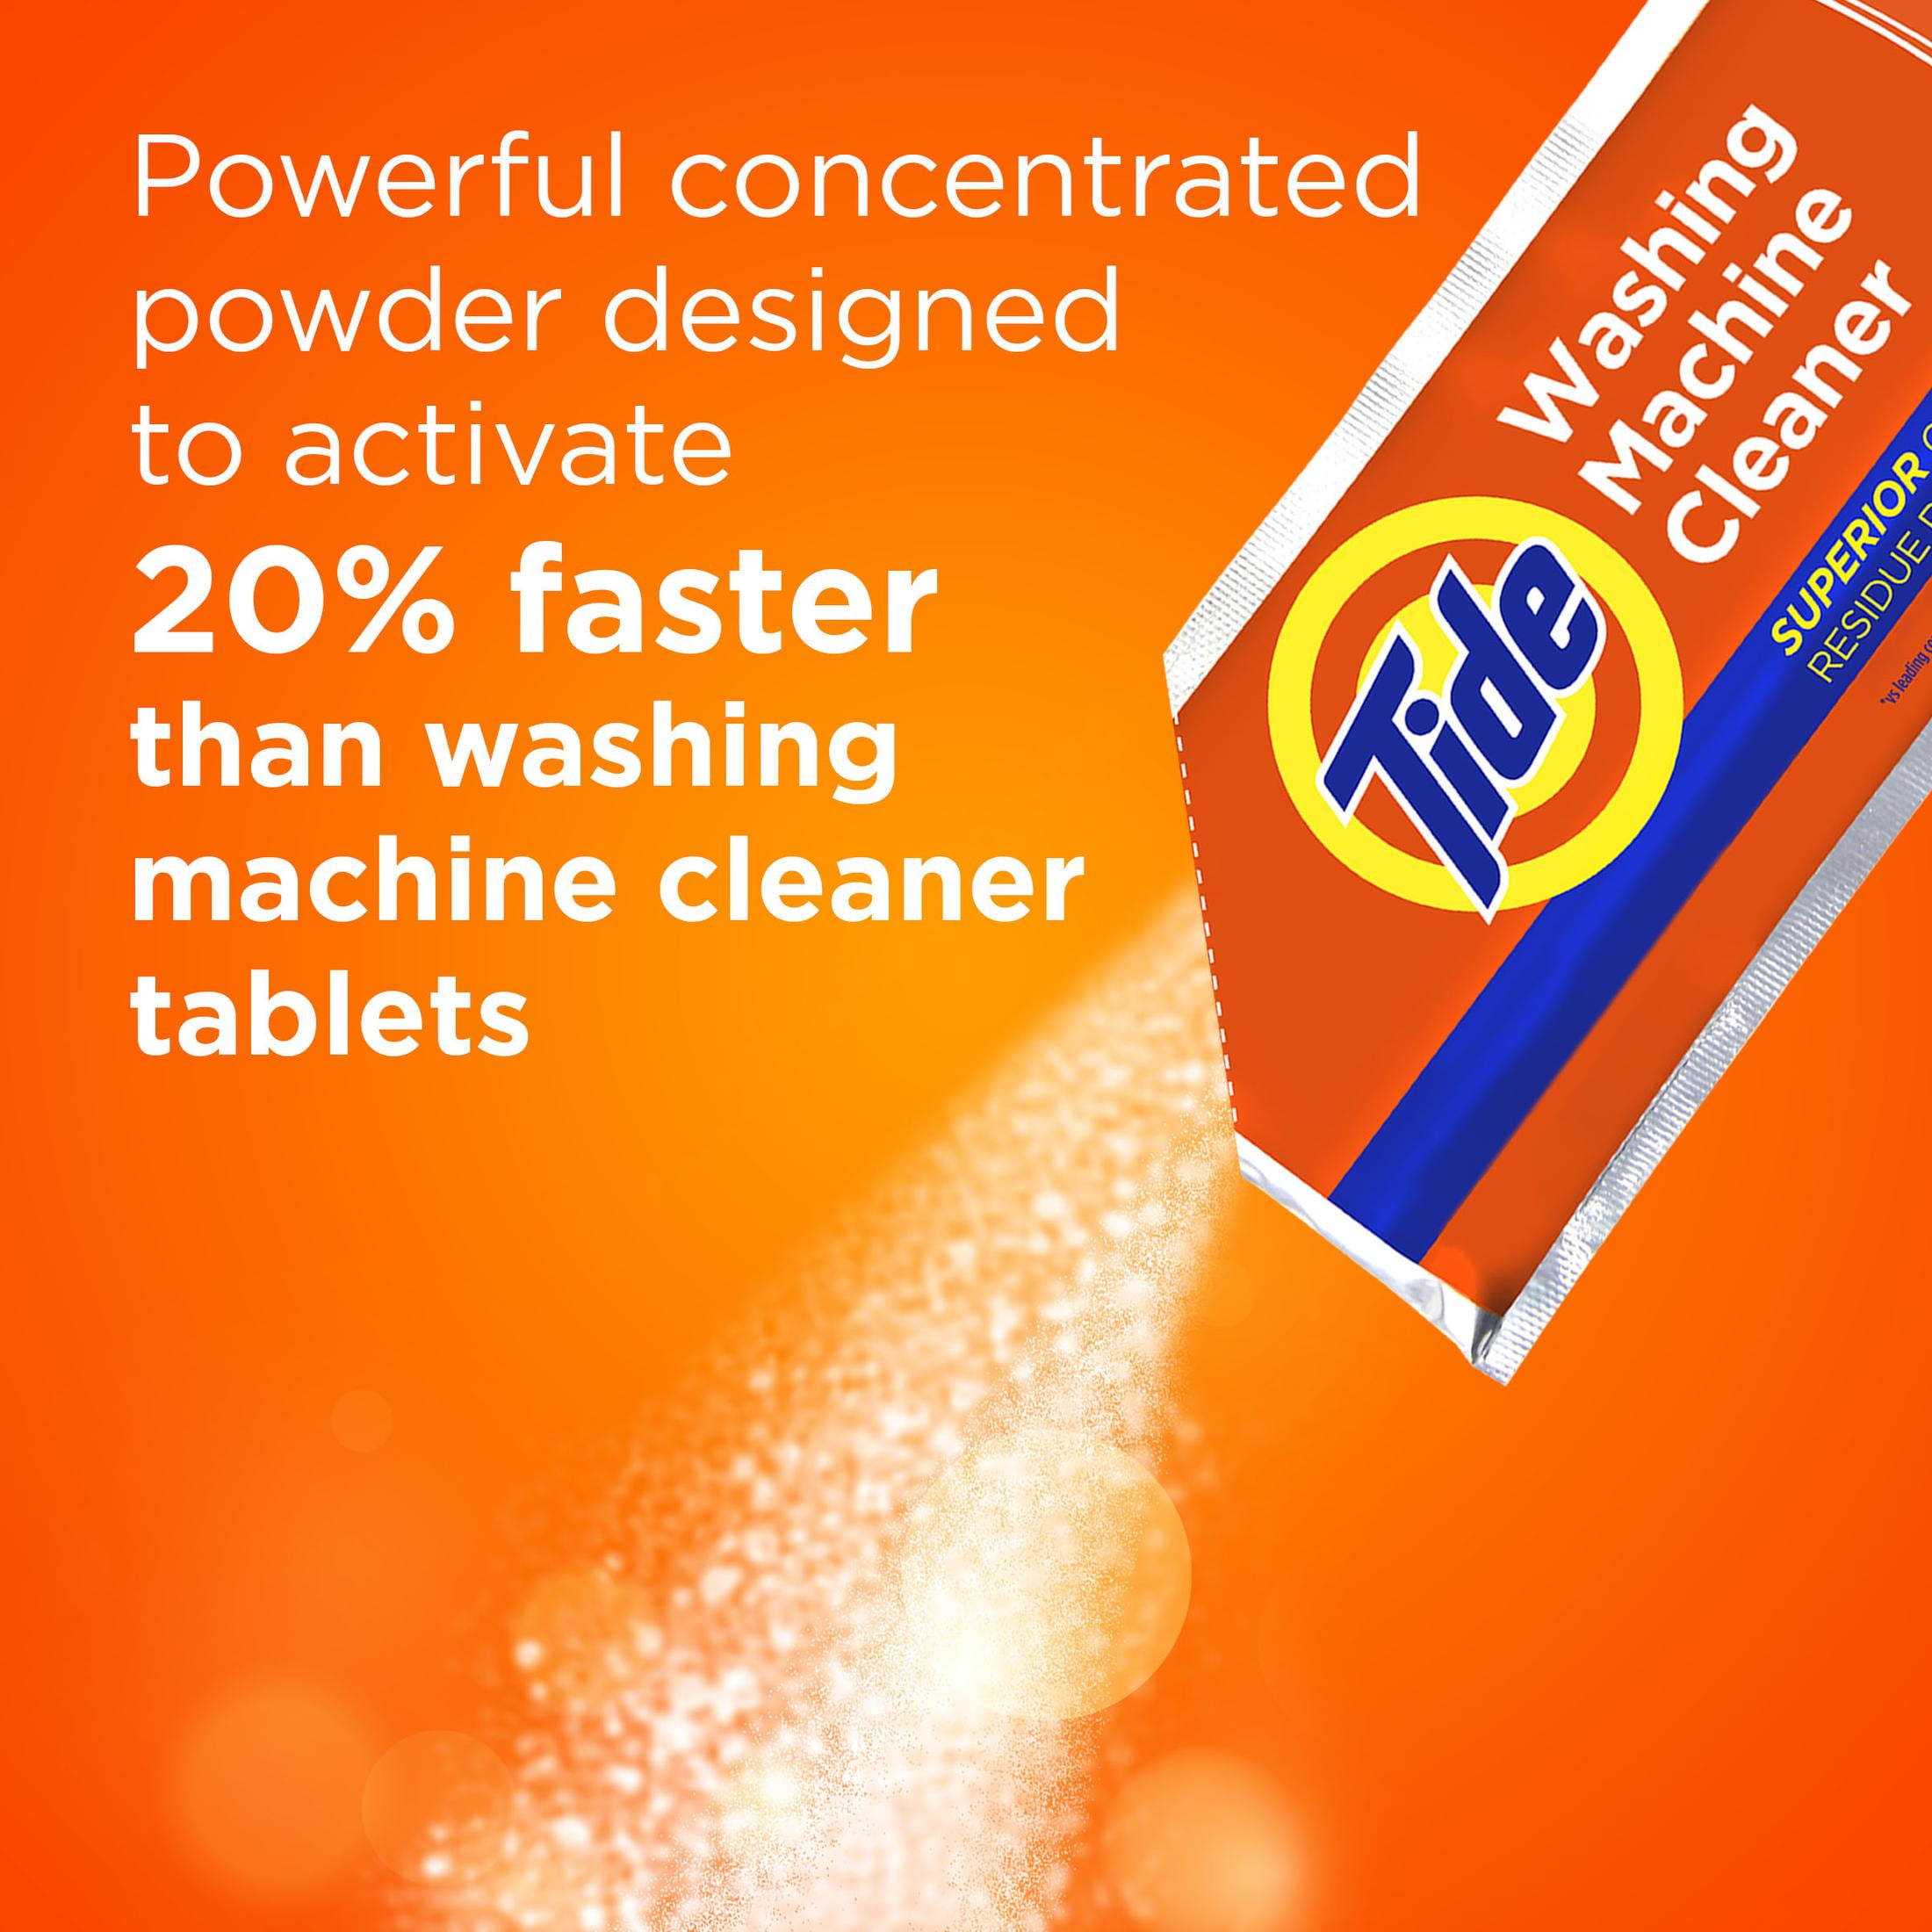 Tide Washing Machine Cleaner with Oxi Powder, Odor Eliminator and Washer  Residue Remover